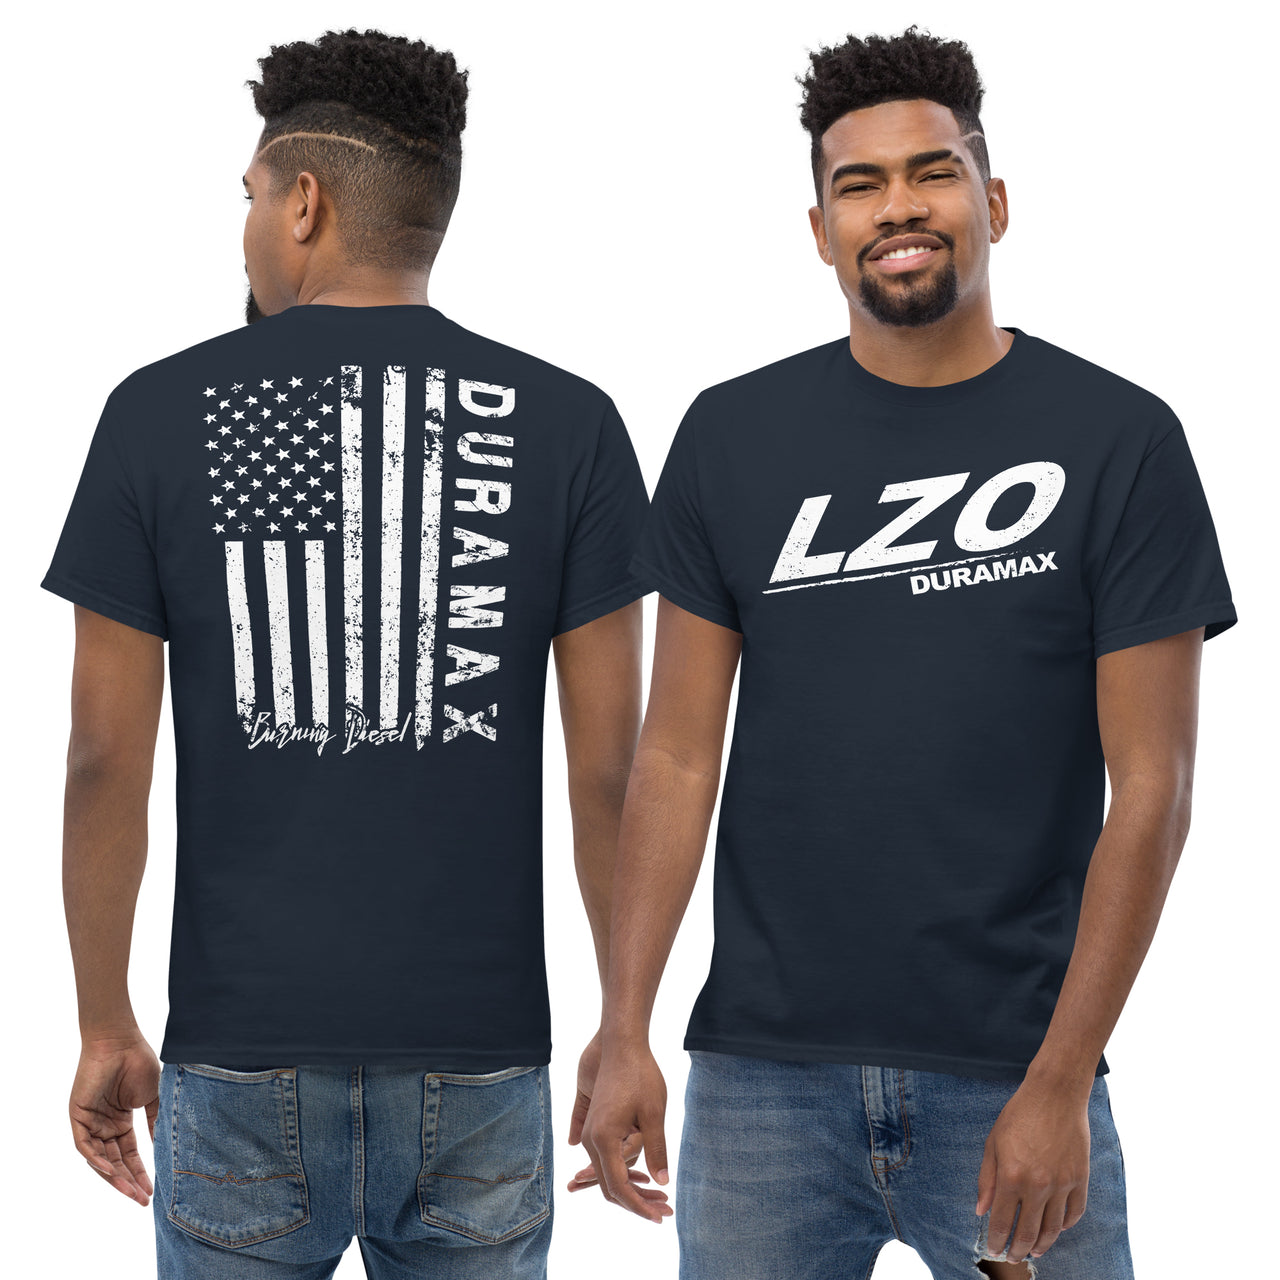 LZO Duramax T-Shirt With American Flag Design modeled in navy